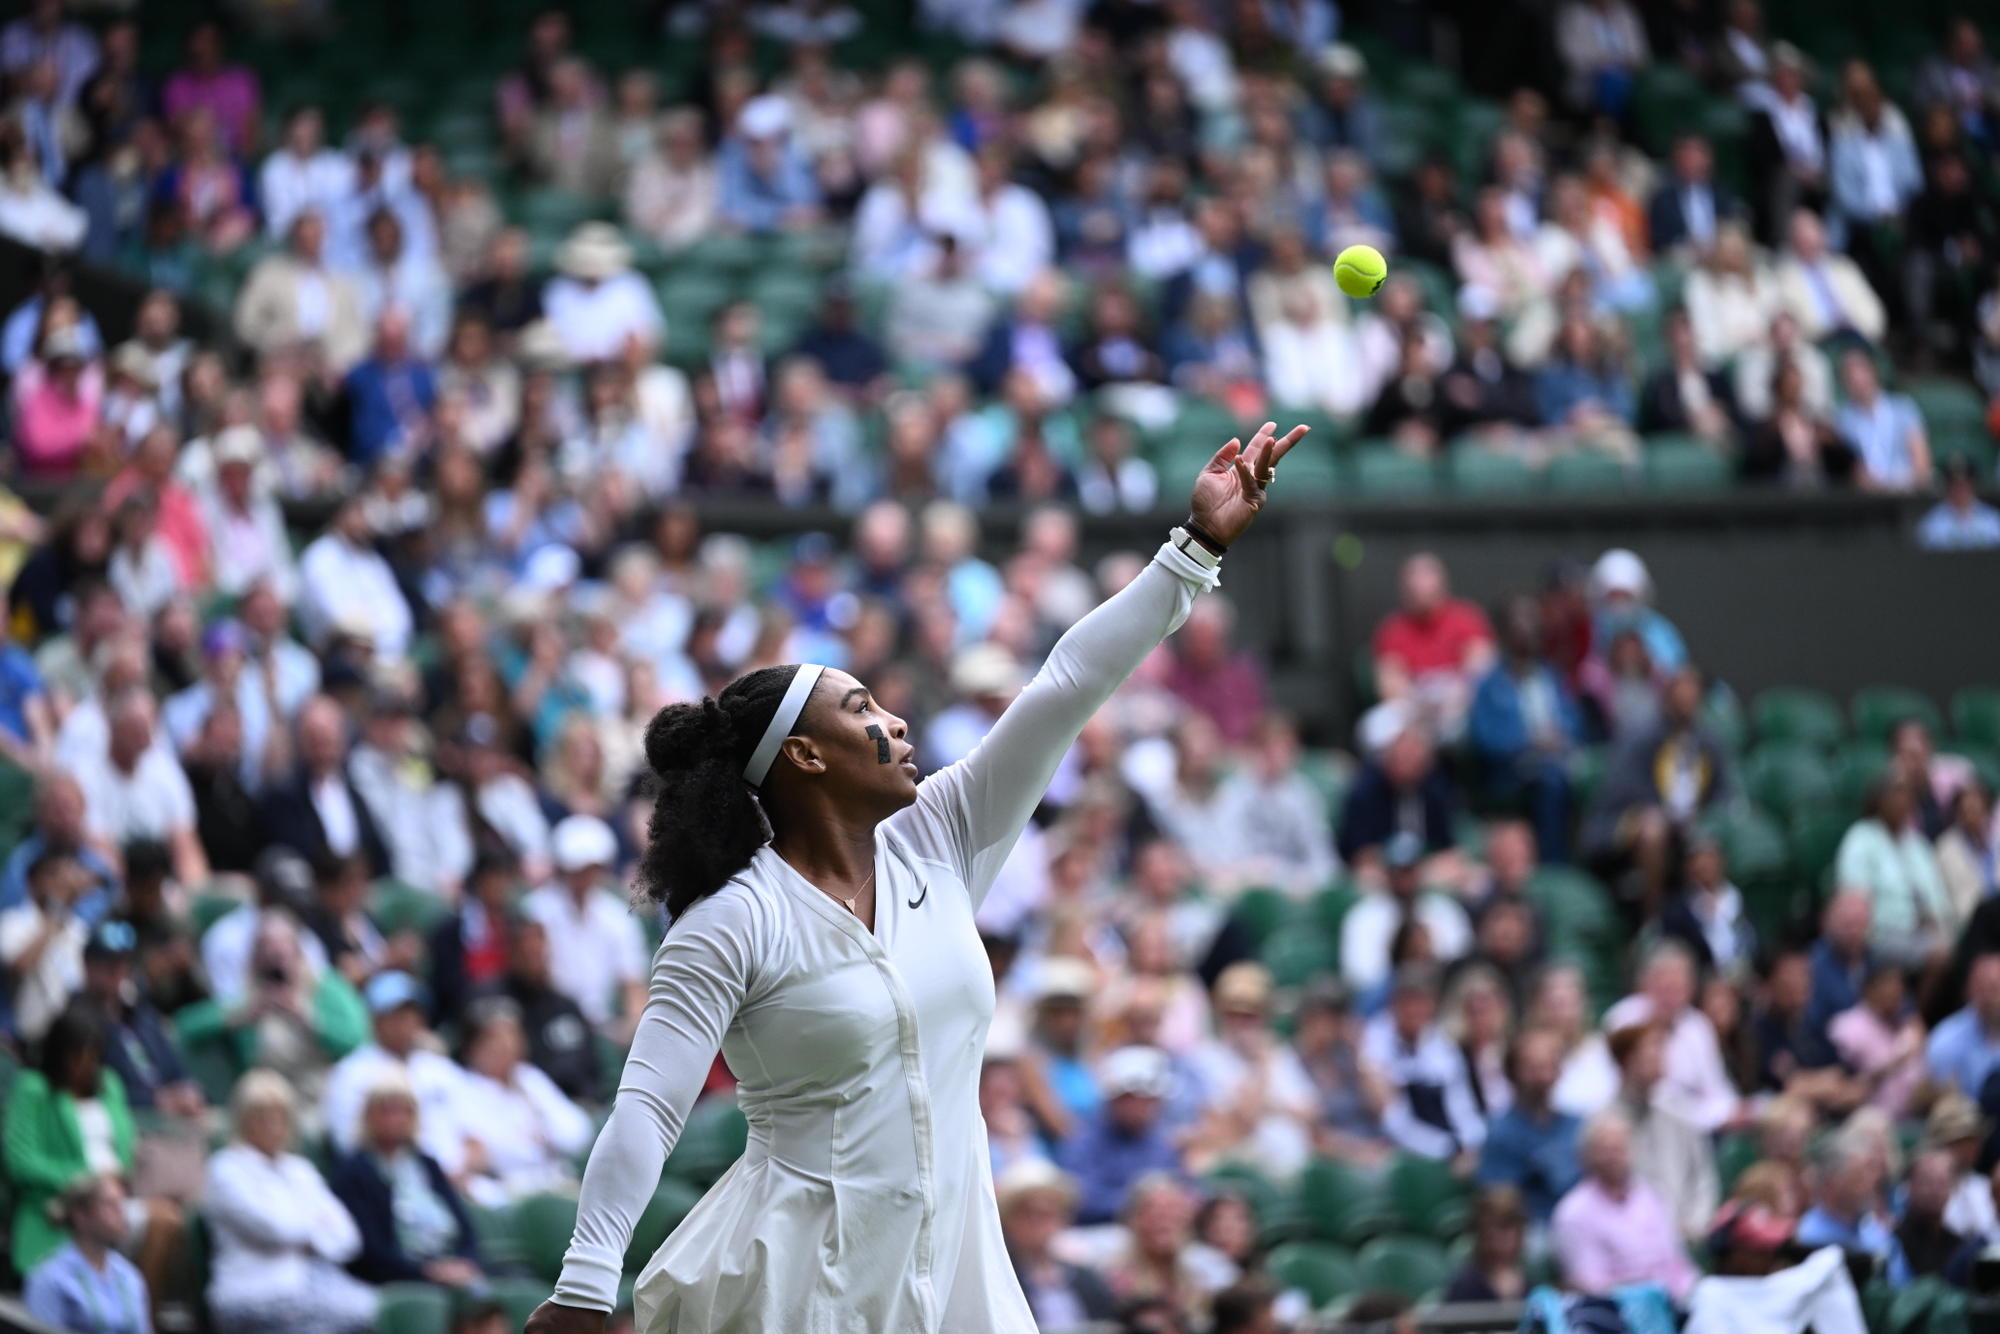 Serena Williams LOSES in Round 1 at Wimbledon: Surely time to retire?